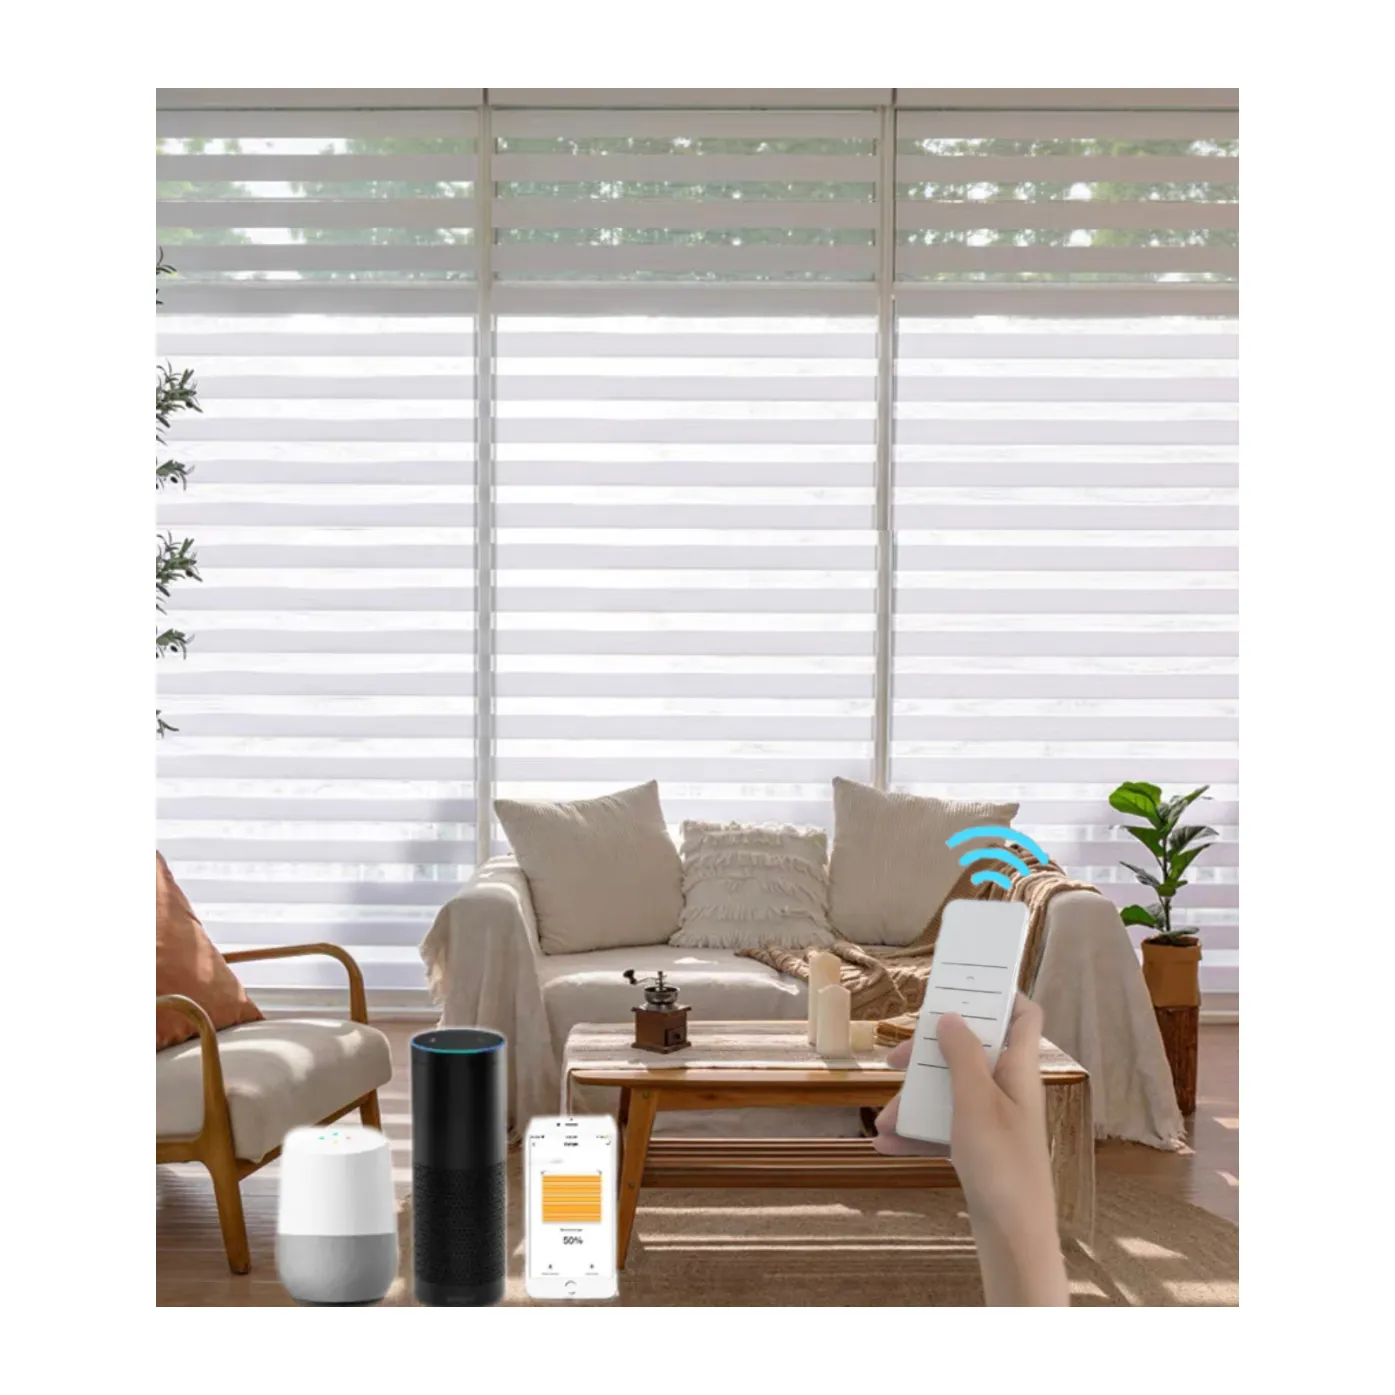 Automatic Blinds Motorized Day and Night Dual Layers Rechargeable Motorized Zebra Roller Blinds for Home, Office, Hotel